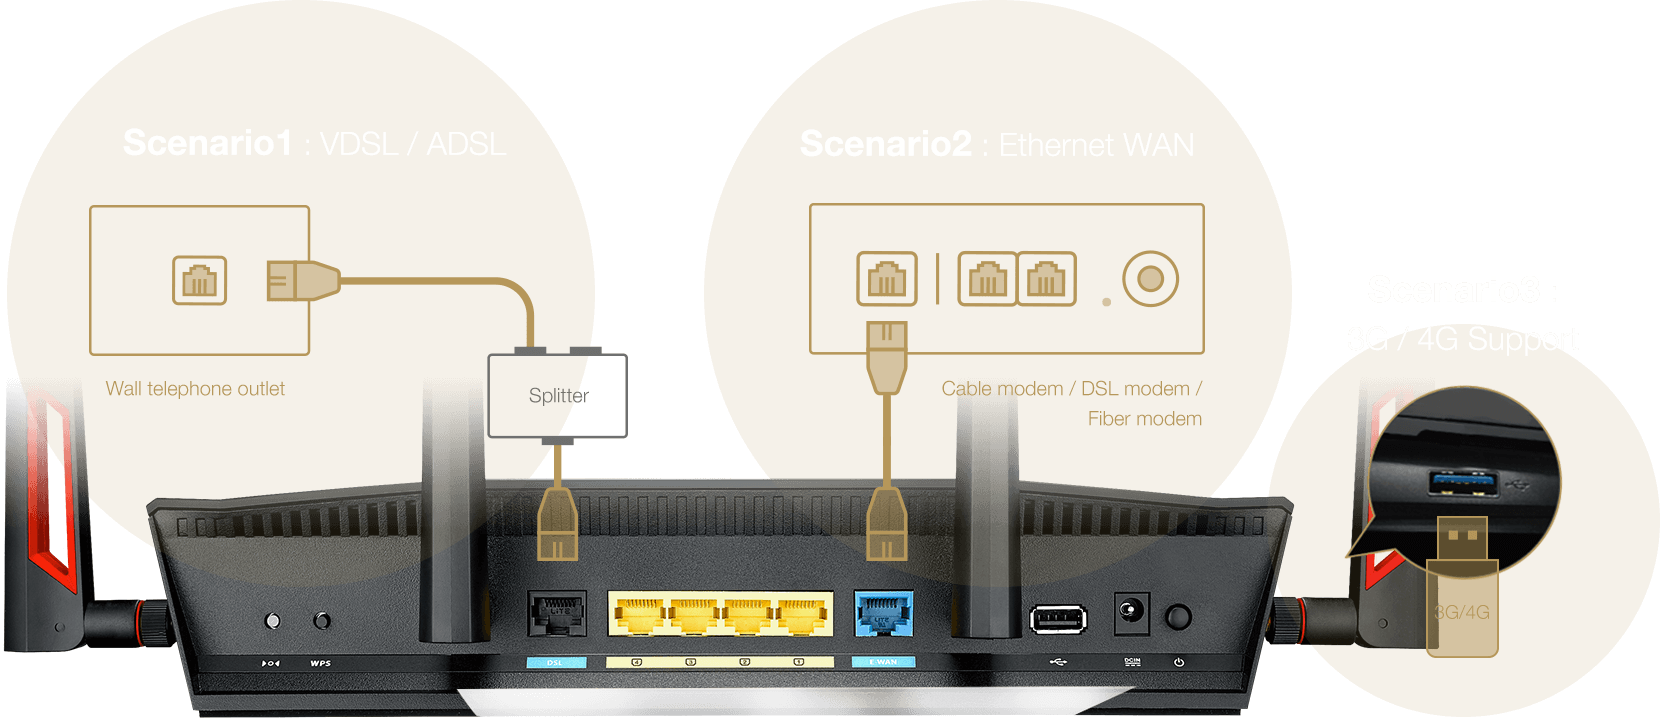 DSL-AC3100 has multiple ways to connect to the internet, with a choice of DSL, Ethernet or 3G/4G LTE*